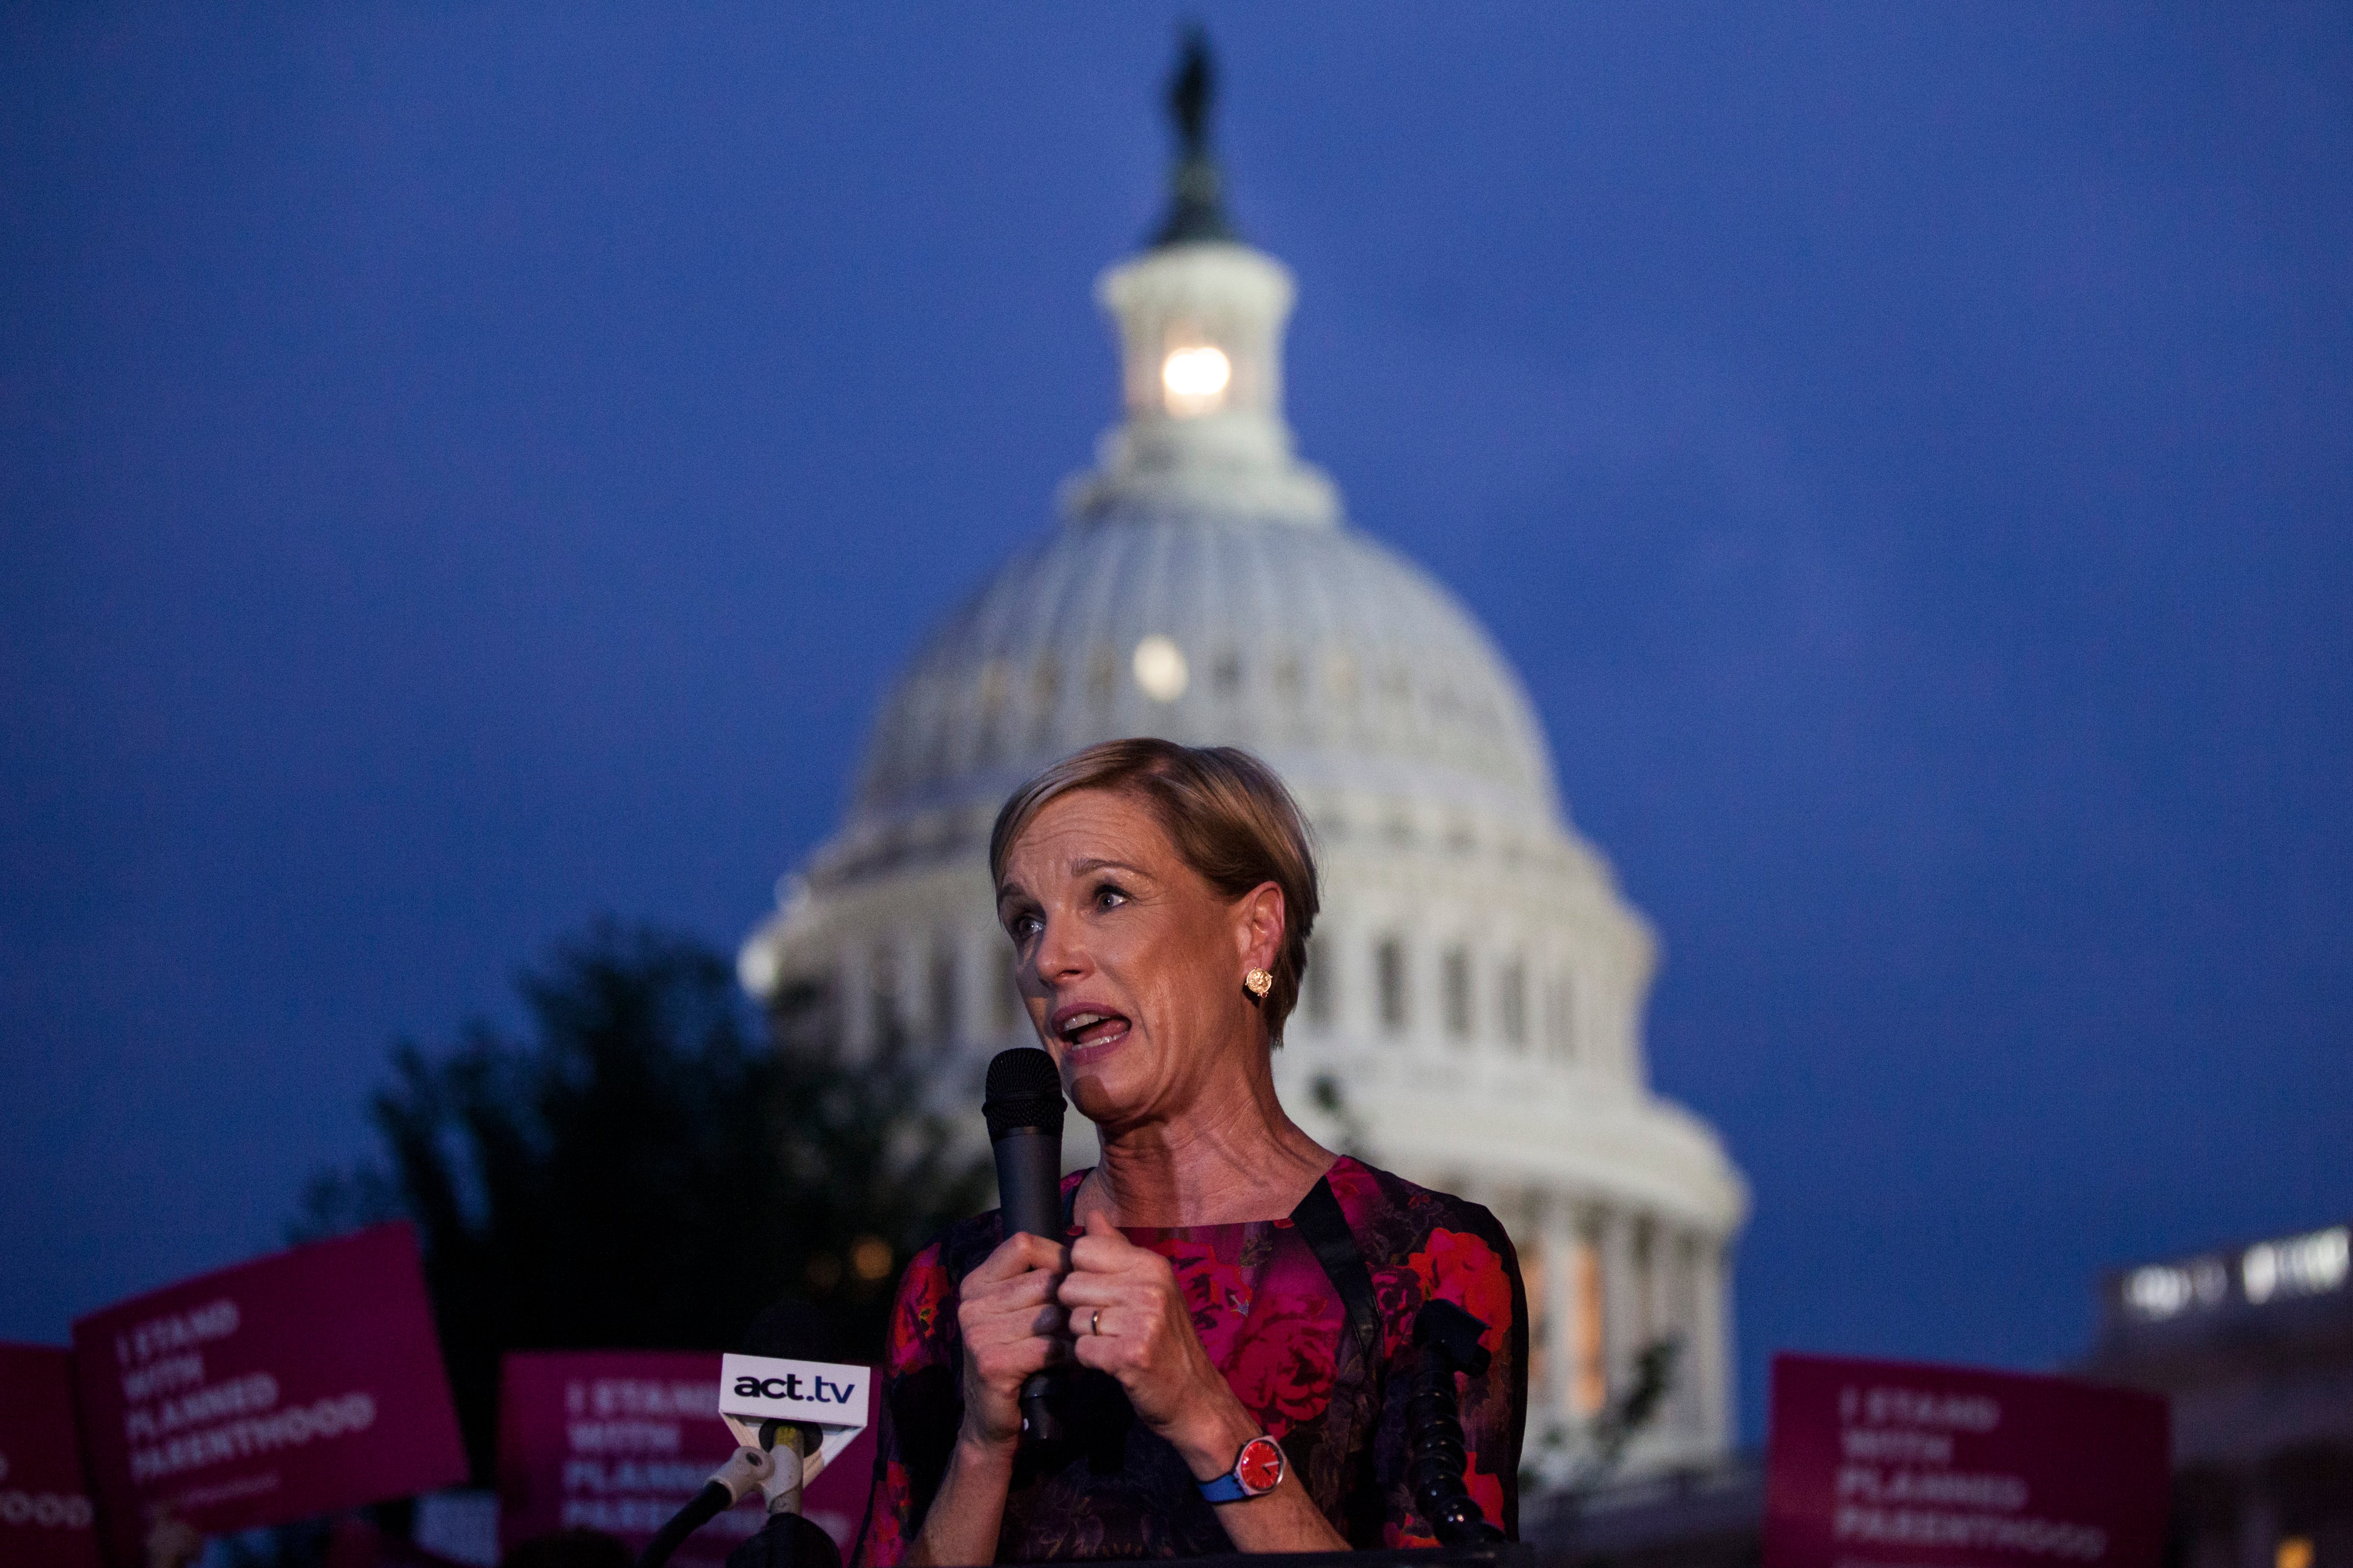 Planned Parenthood President Cecile Richards speaks during a rally opposing repeal of the Affordable Care Act outside of the Capitol Building on July 27, 2017 in Washington, DC. (Photo by Zach Gibson/Getty Images) (Zach Gibson—Getty Images)